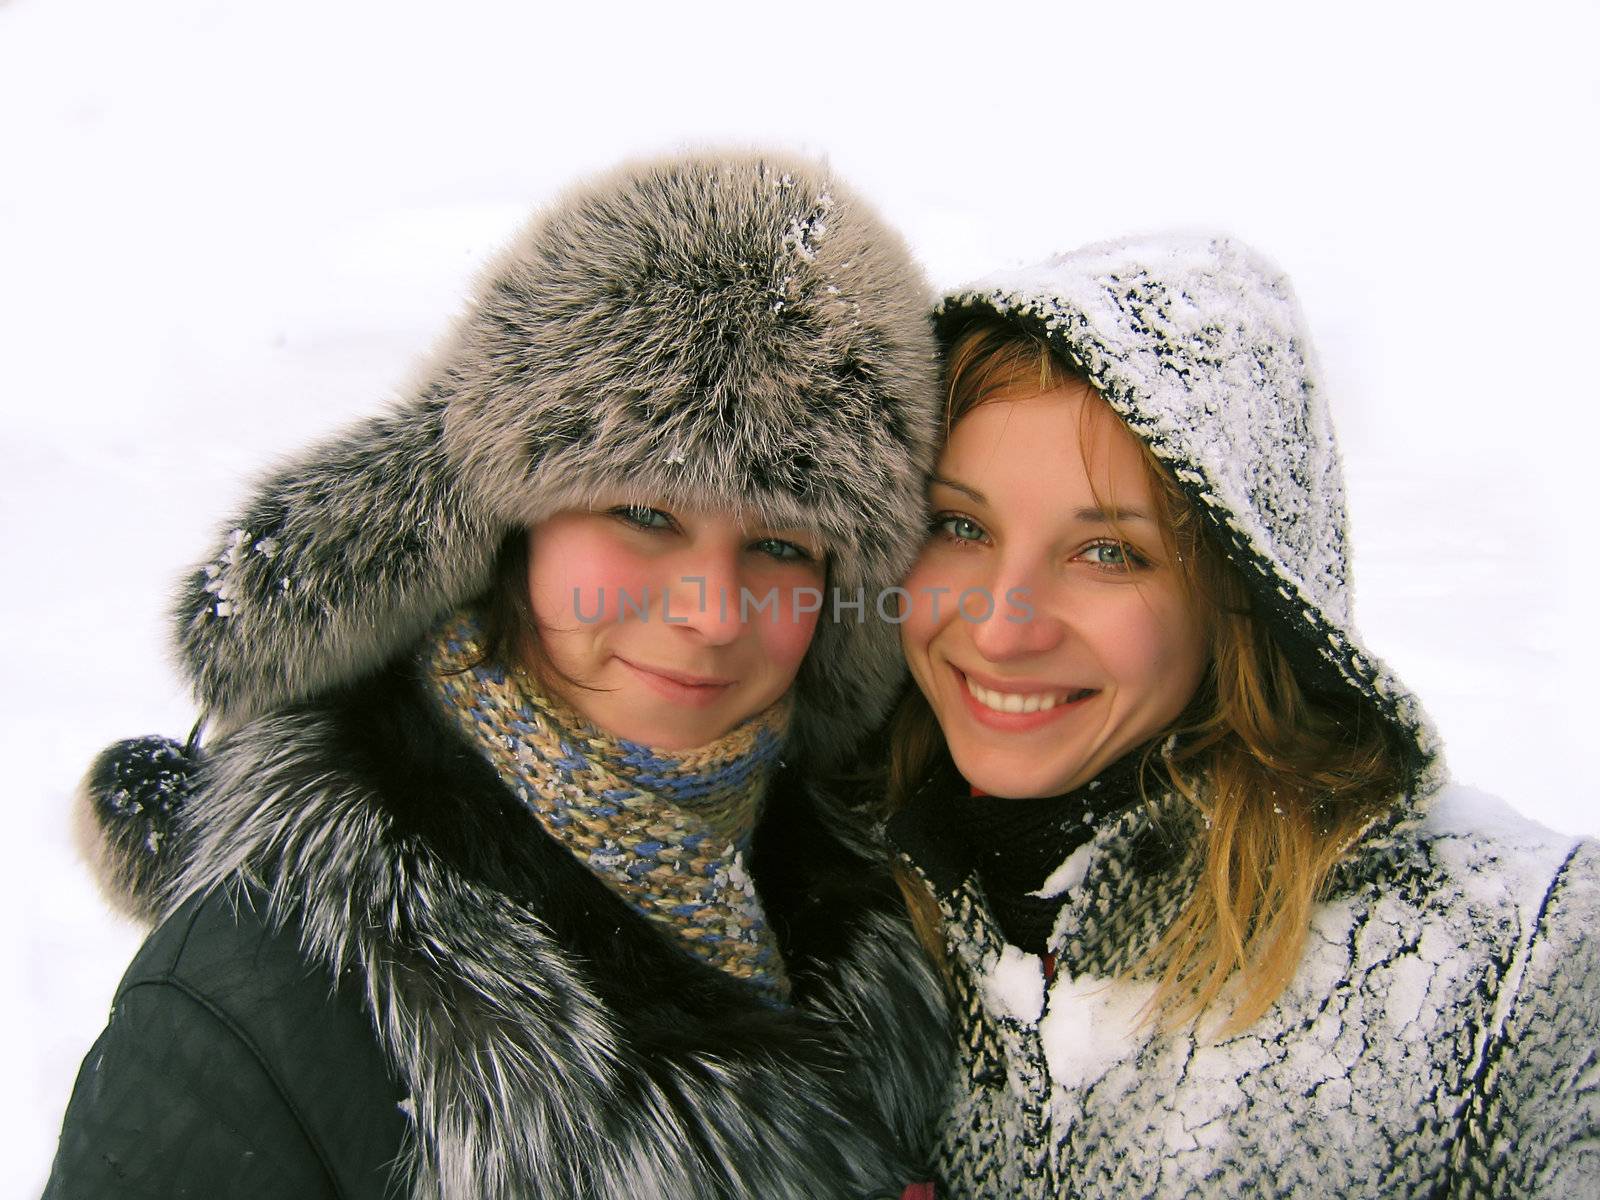 Two smiling girls on snowy background